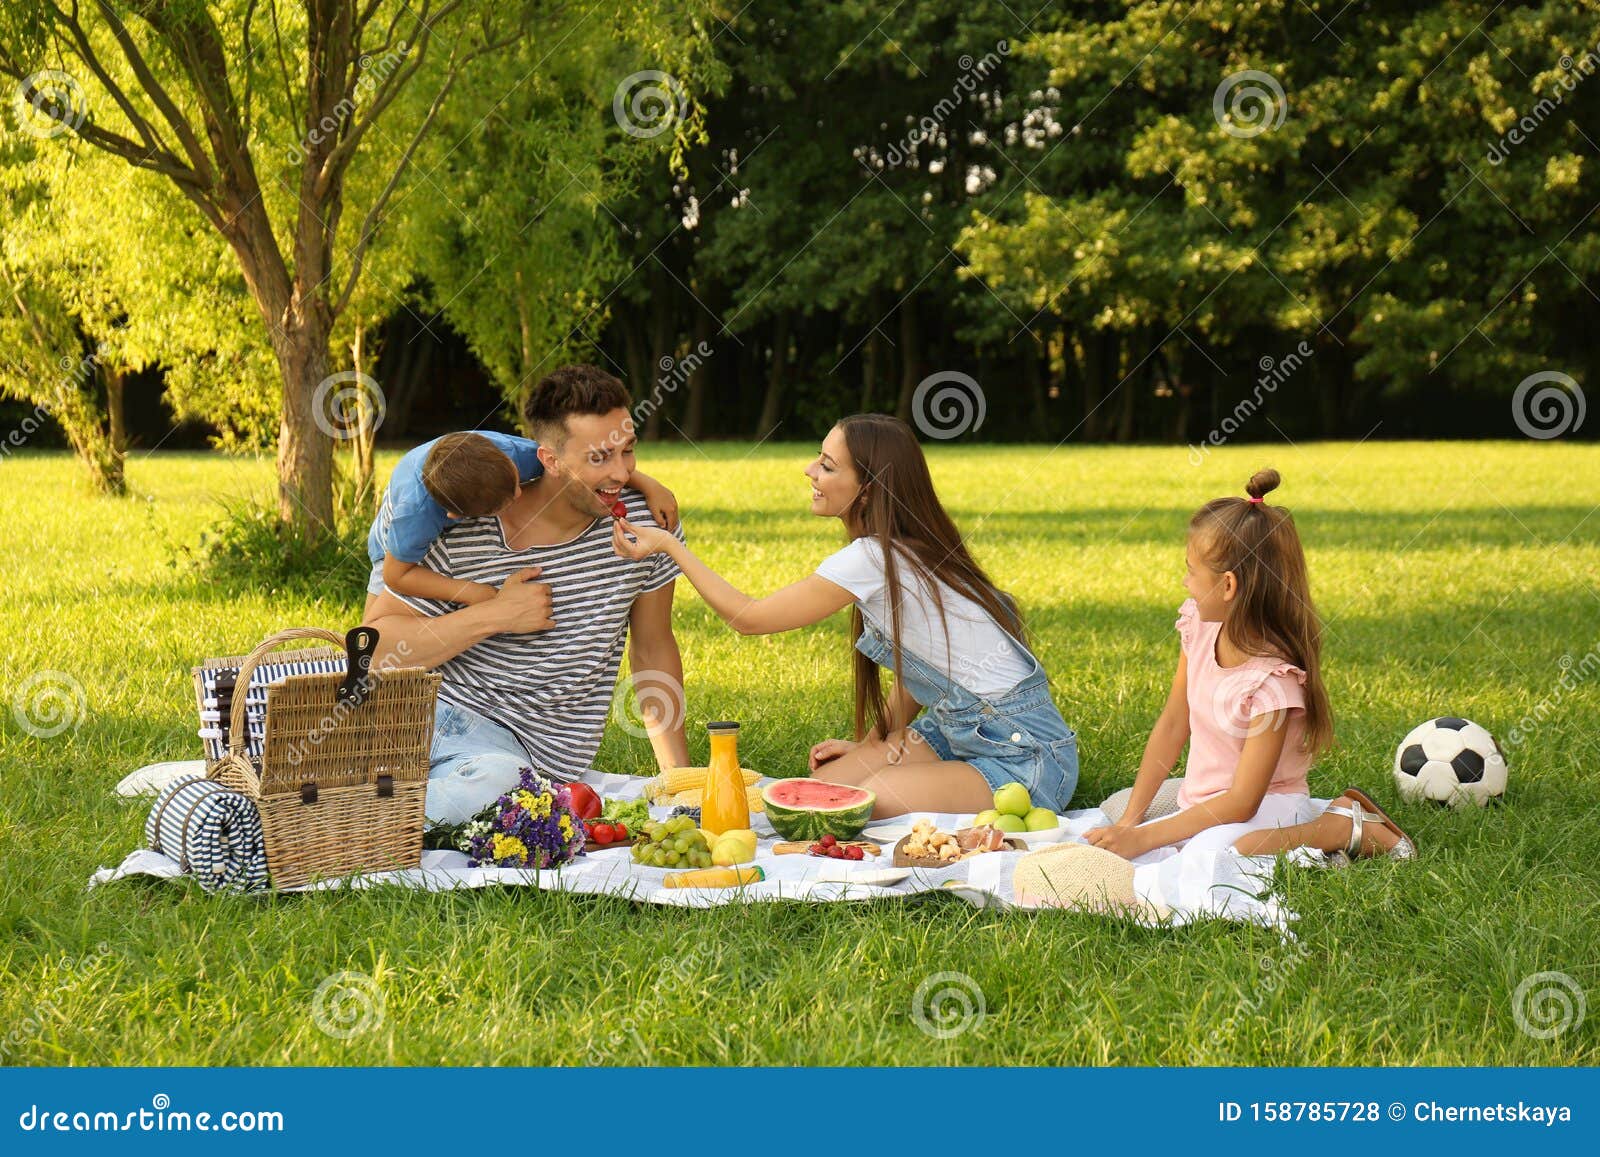 Happy Family Having Picnic in Park on Summer Day Stock Photo - Image of